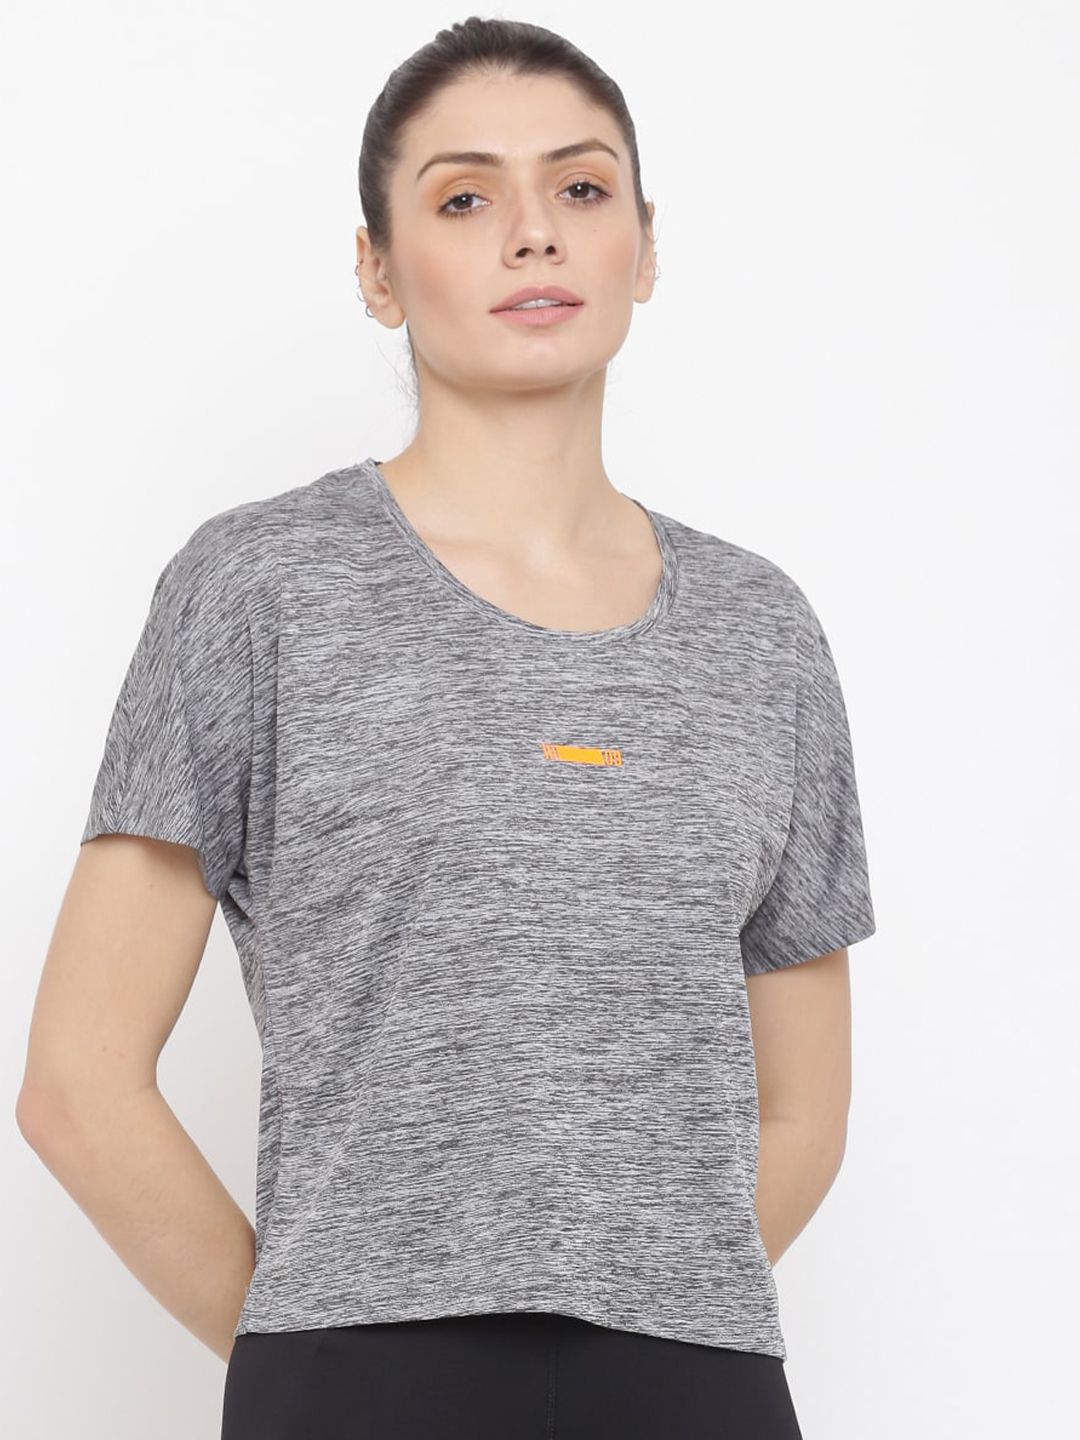 MKH Women Black & Grey Extended Sleeves Dri-FIT Applique T-shirt Price in India